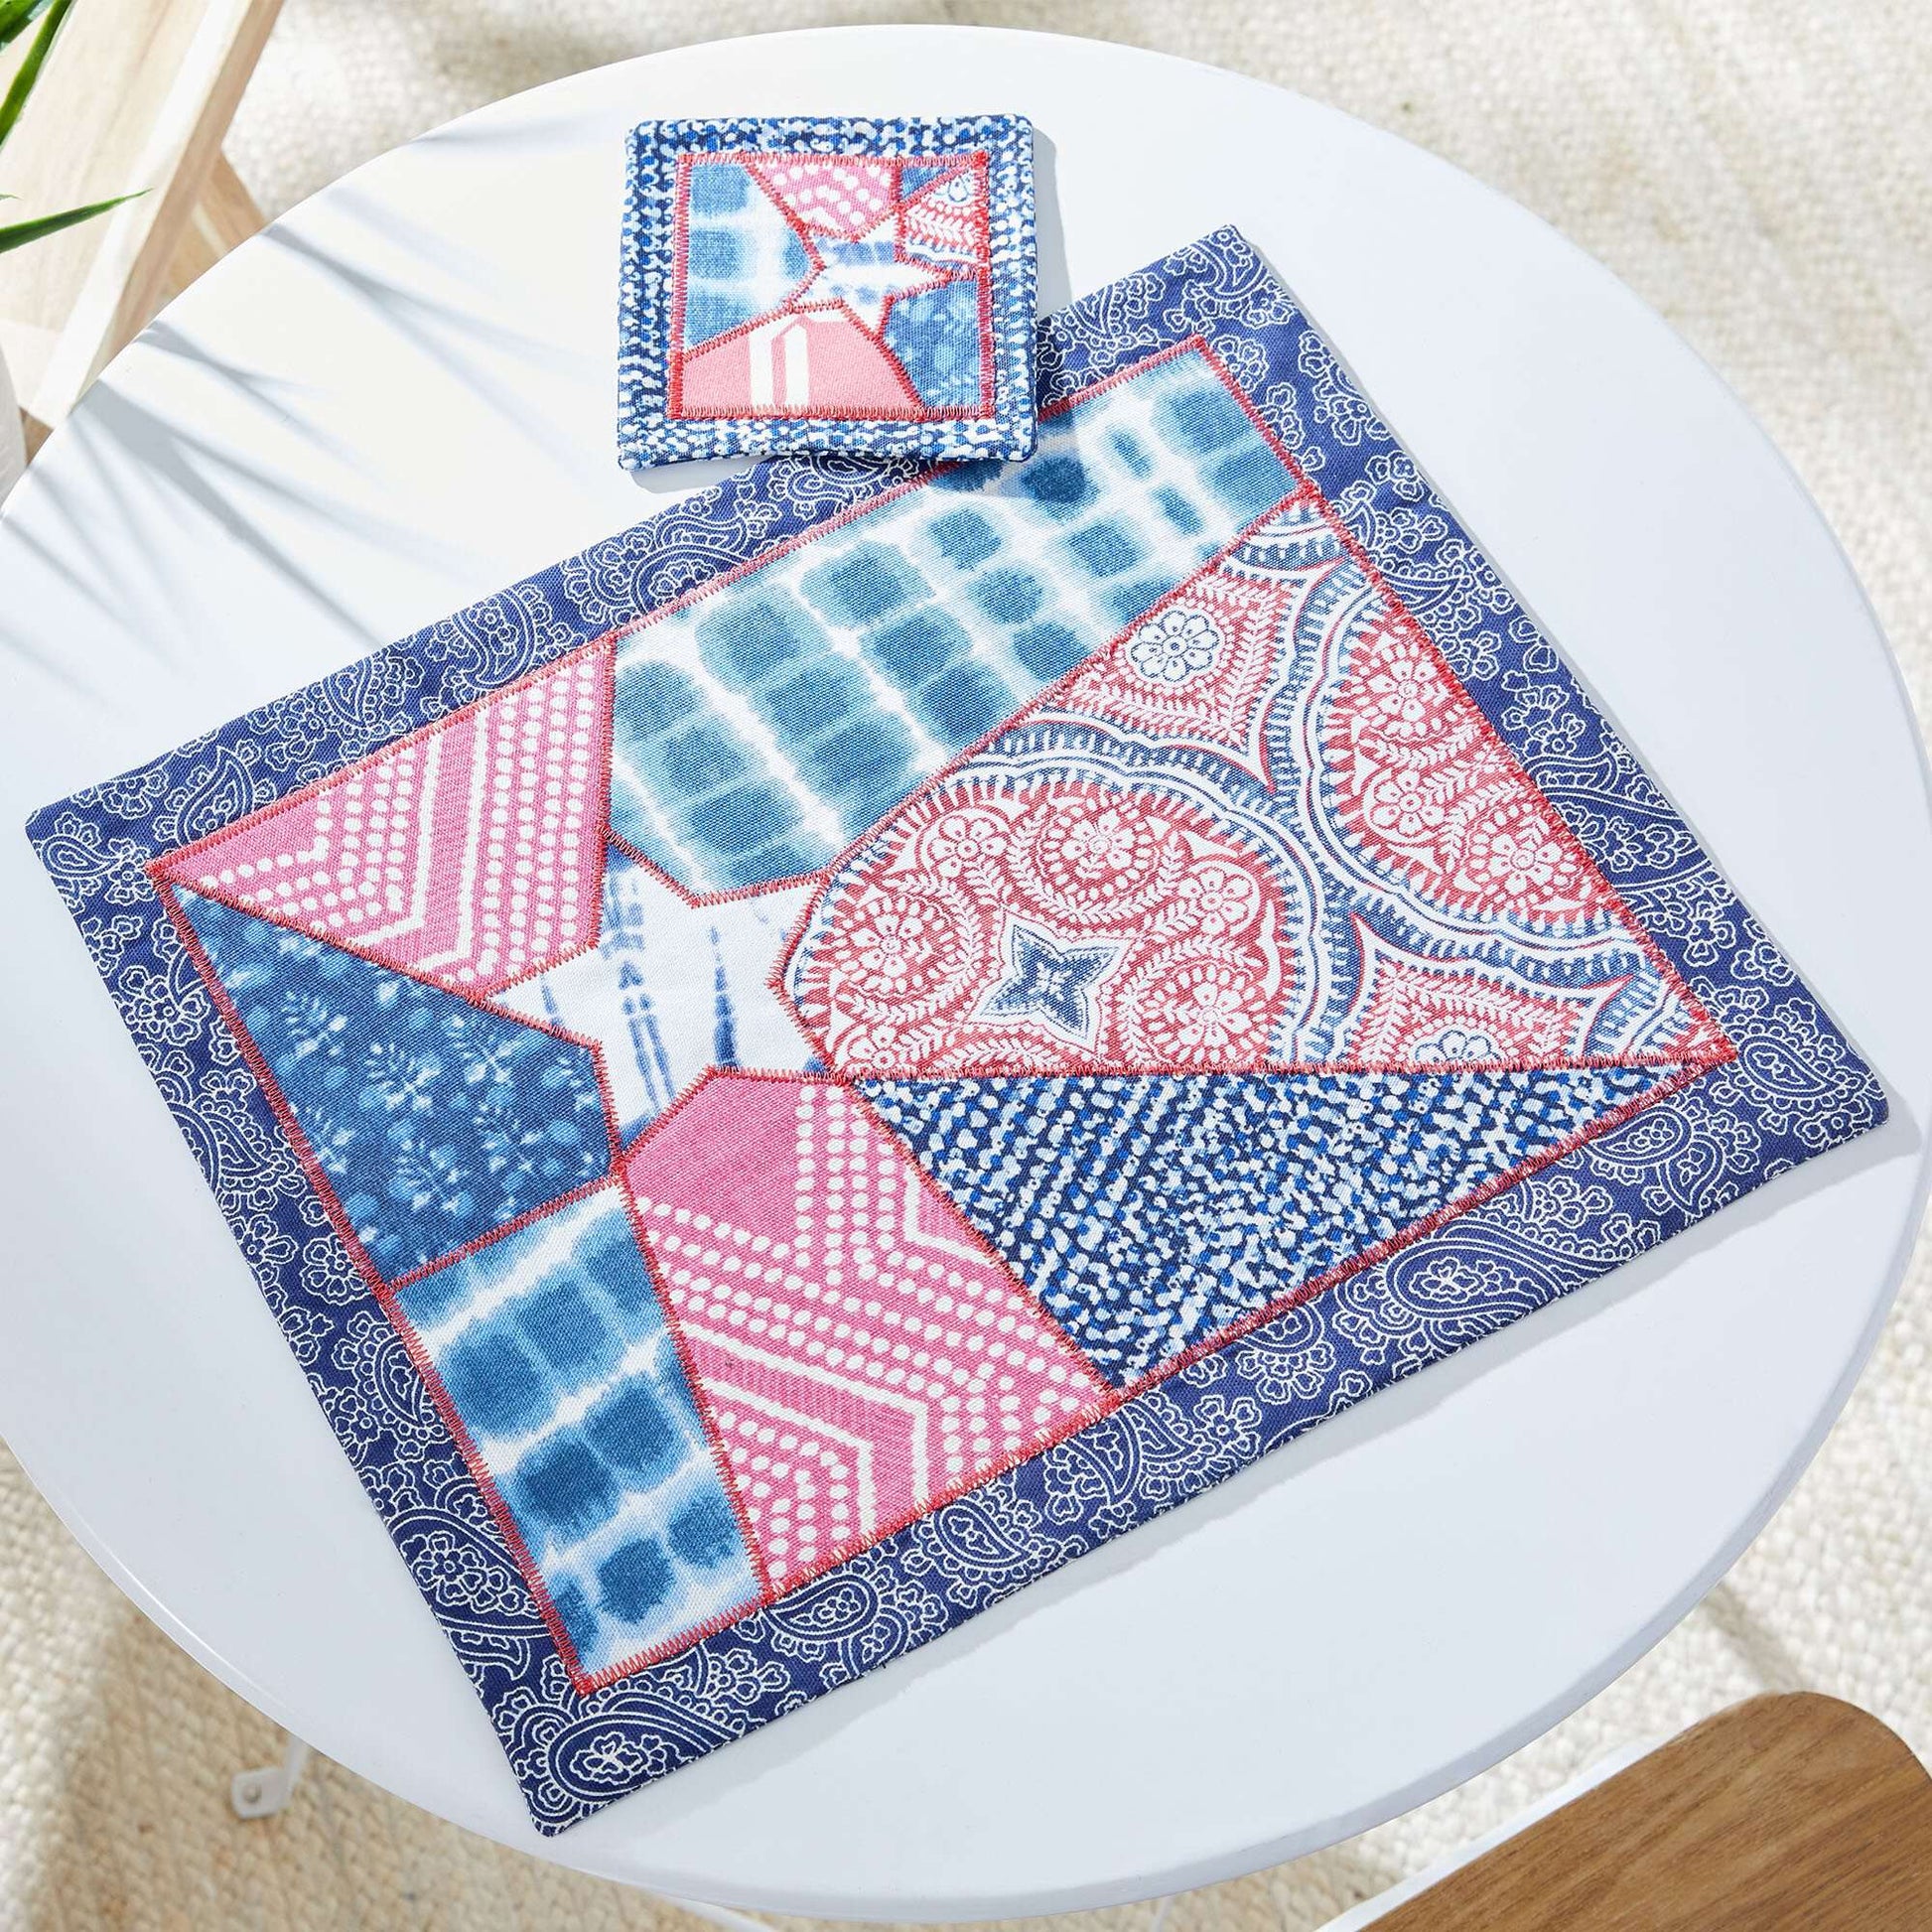 Free Coats & Clark Star Performance Placemat And Coaster Sewing Pattern